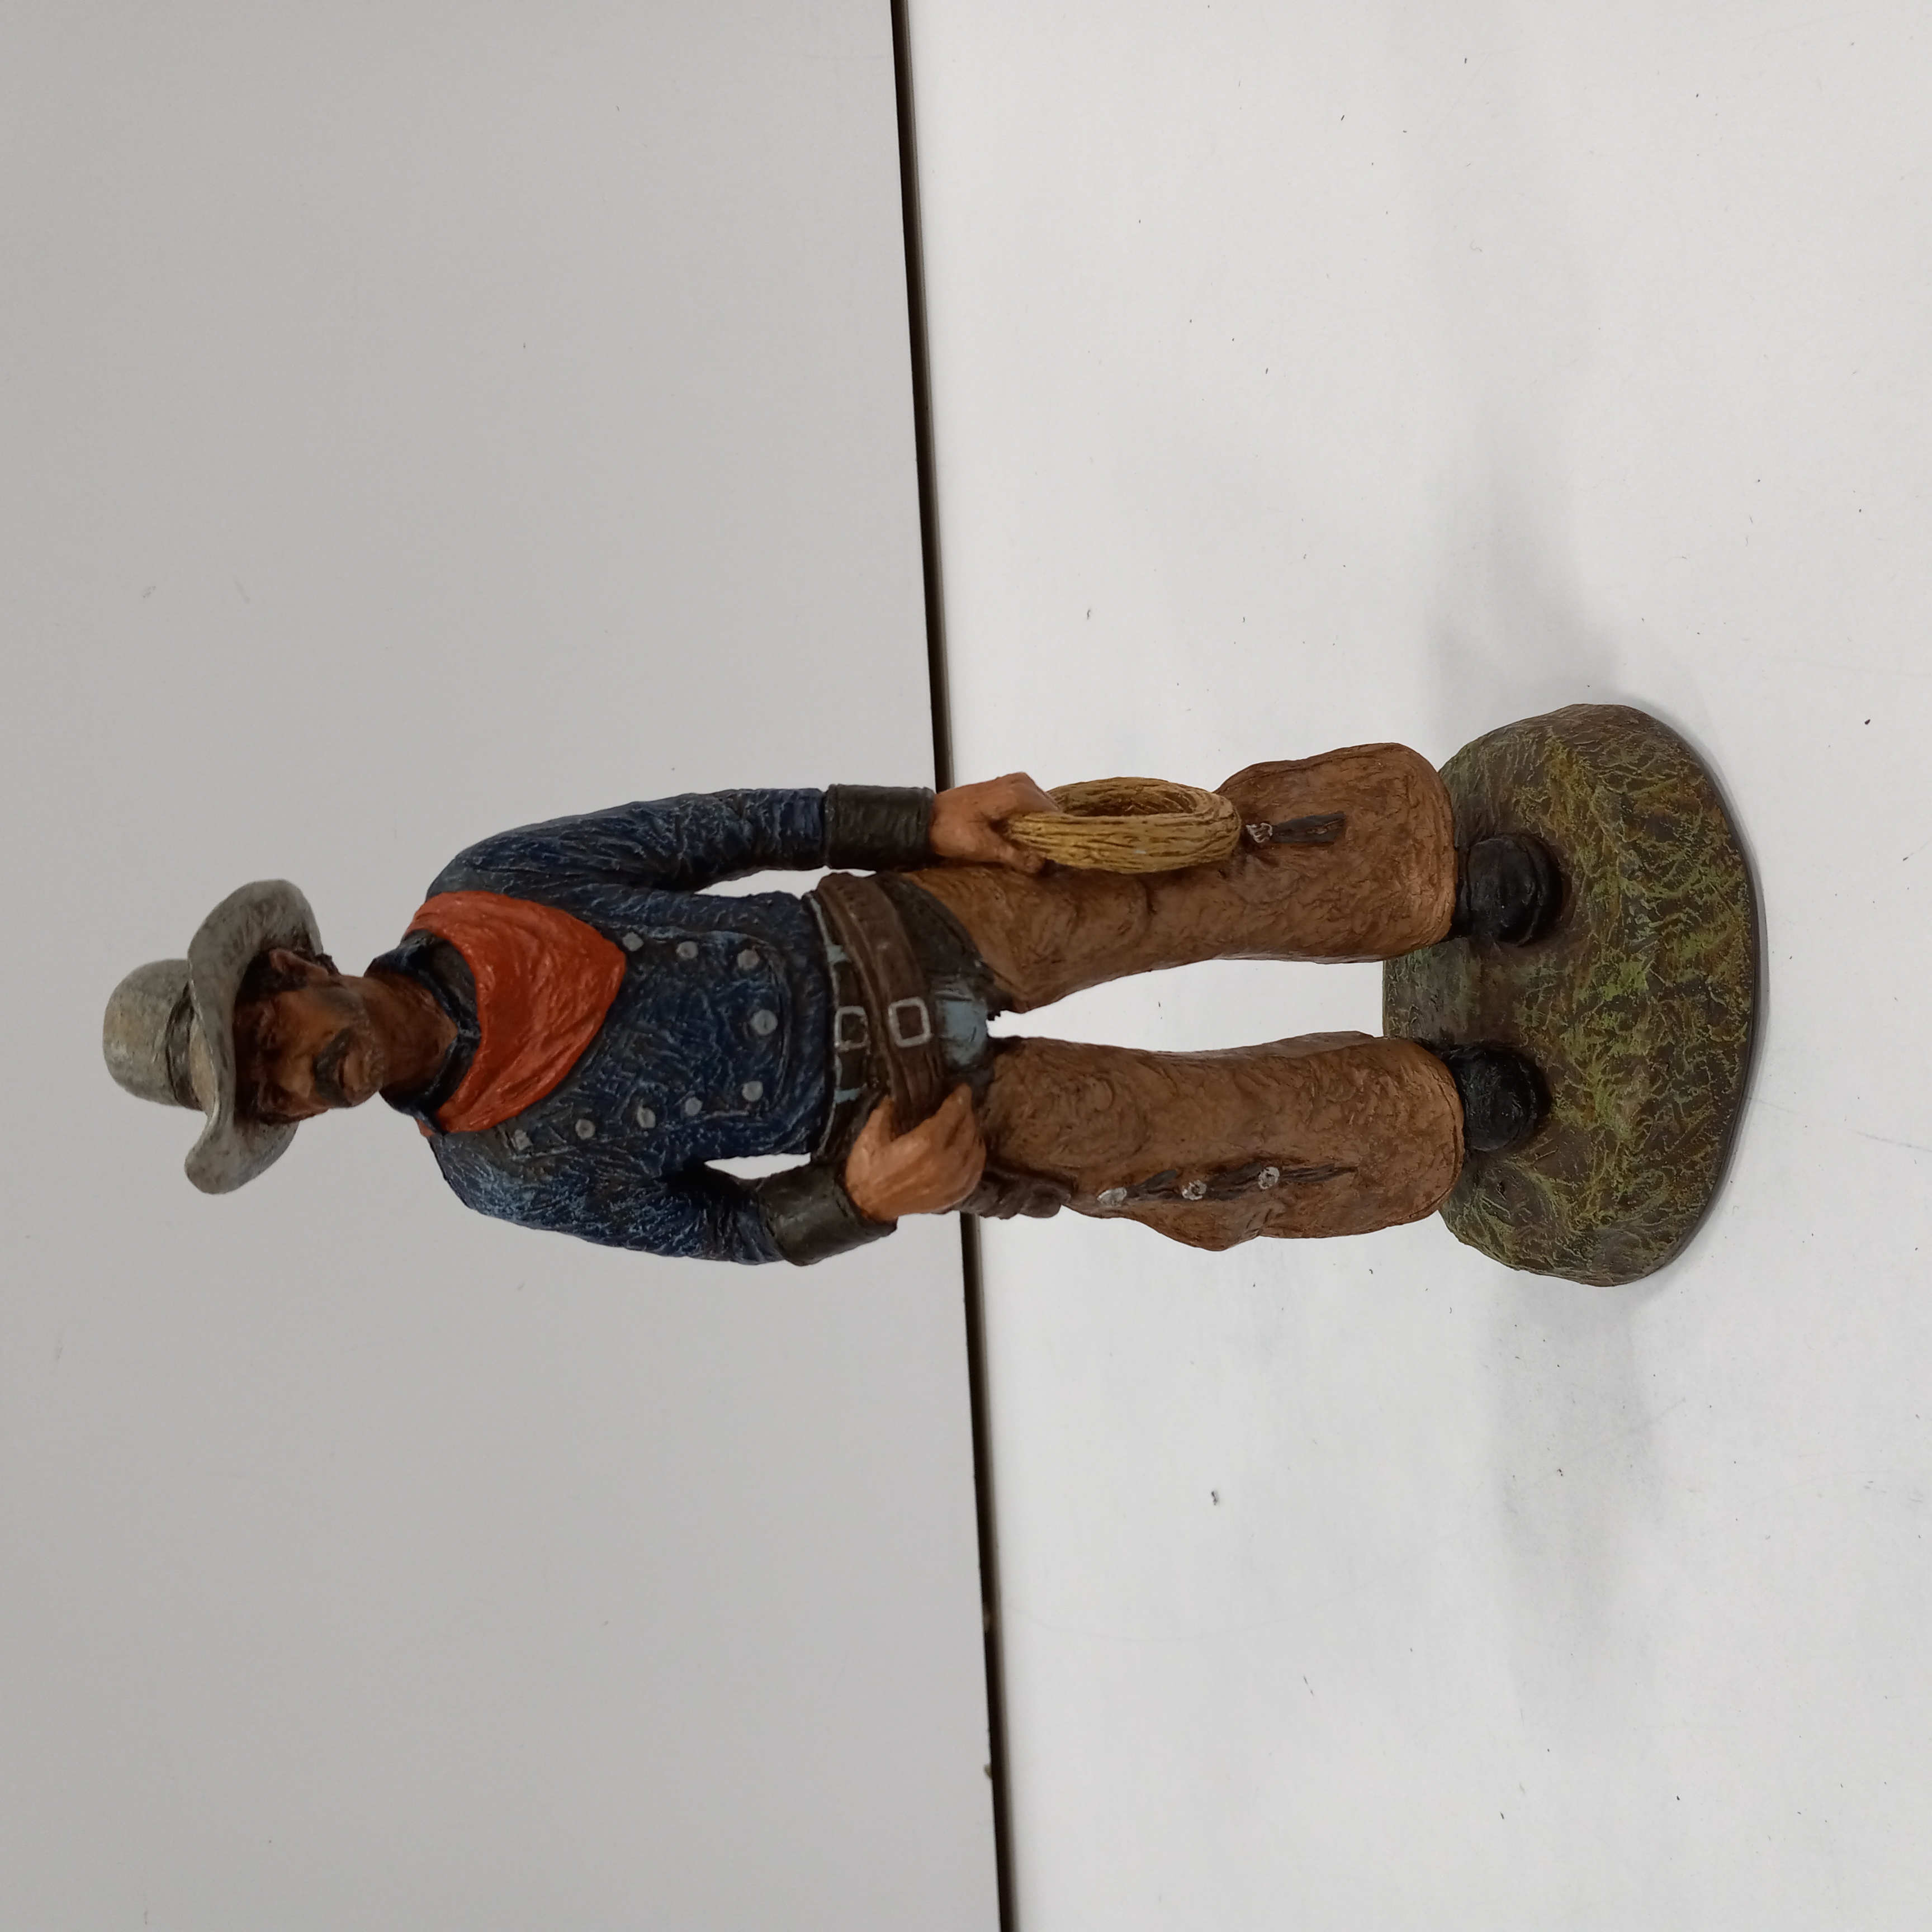 Buy Michael Garman Round up Rodeo Cowboy Sculpture for USD 63.90 |  GoodwillFinds